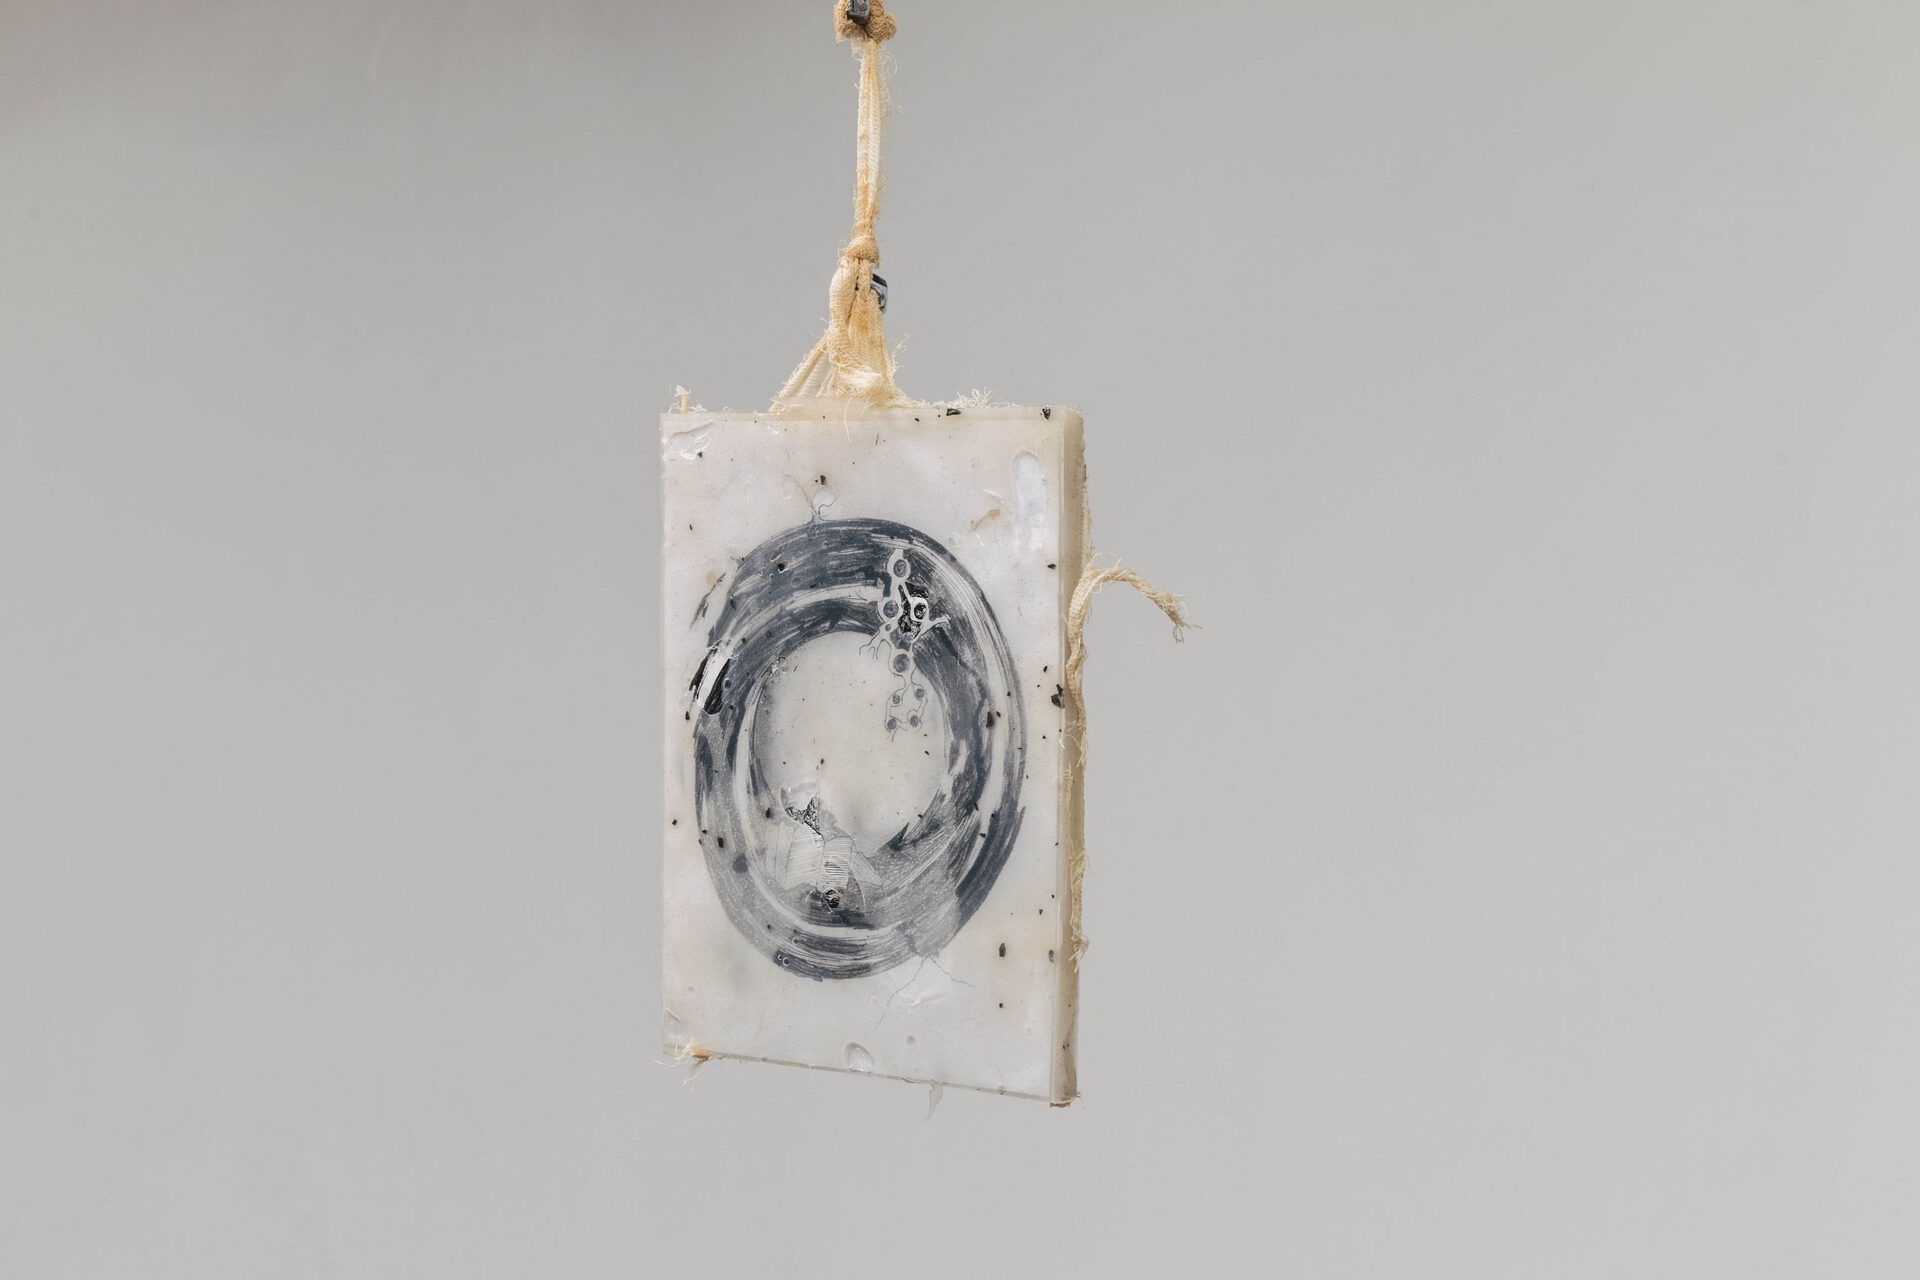 Hanged 2. 2021, hypoallergenic silicone, drawing, cheesecloth, rust, screw-nuts, ground, oil traces looped sound 06’54” 22.5х18х1 сm